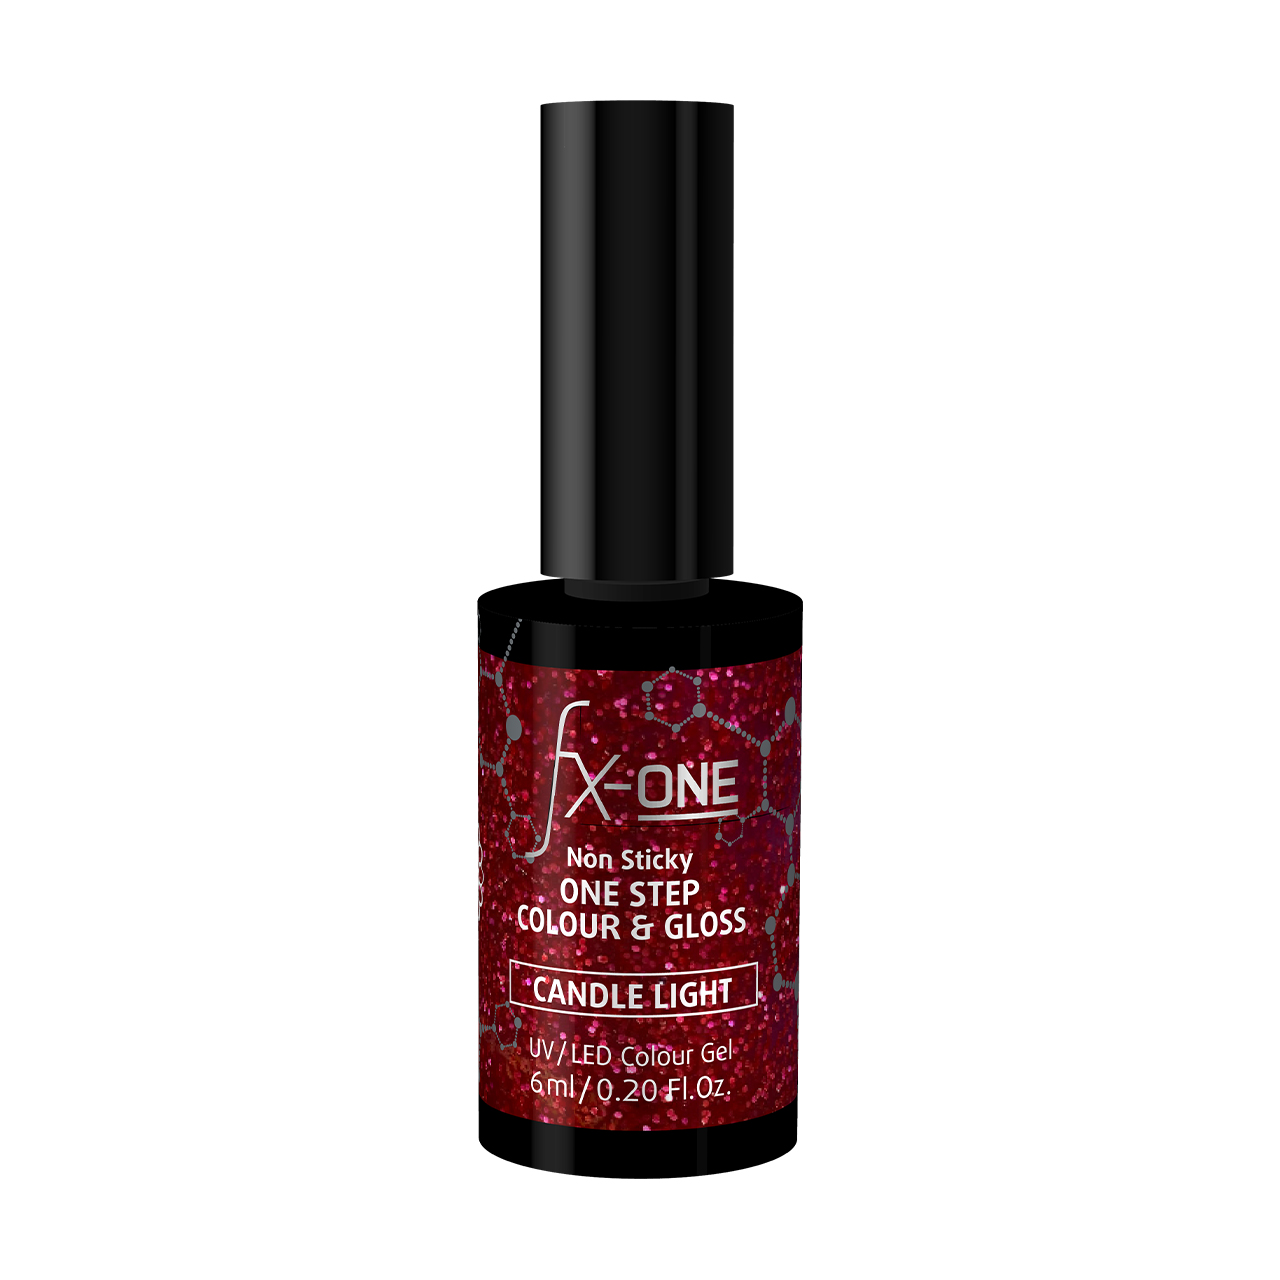 FX-ONE Colour & Gloss CANDLE LIGHT 6ML